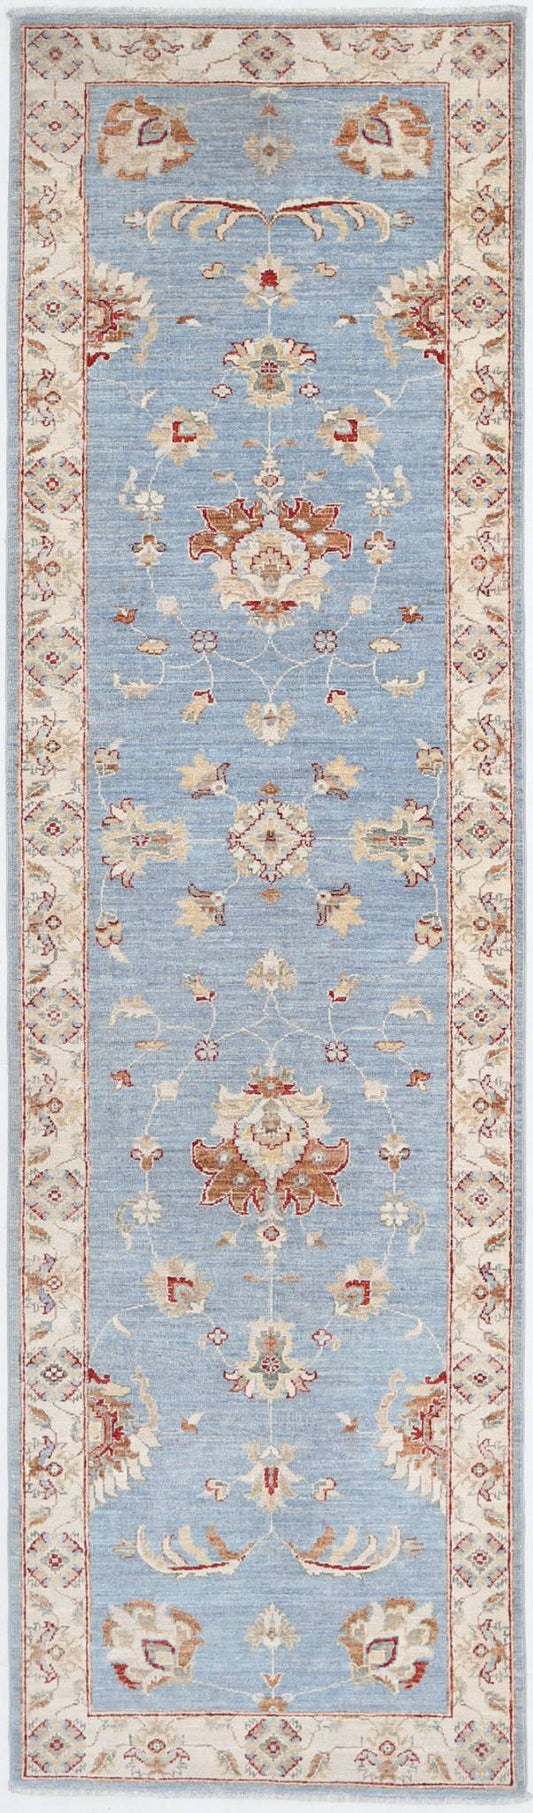 Traditional Hand Knotted Ziegler Farhan Wool Rug of Size 2'8'' X 12'6'' in Blue and Ivory Colors - Made in Afghanistan